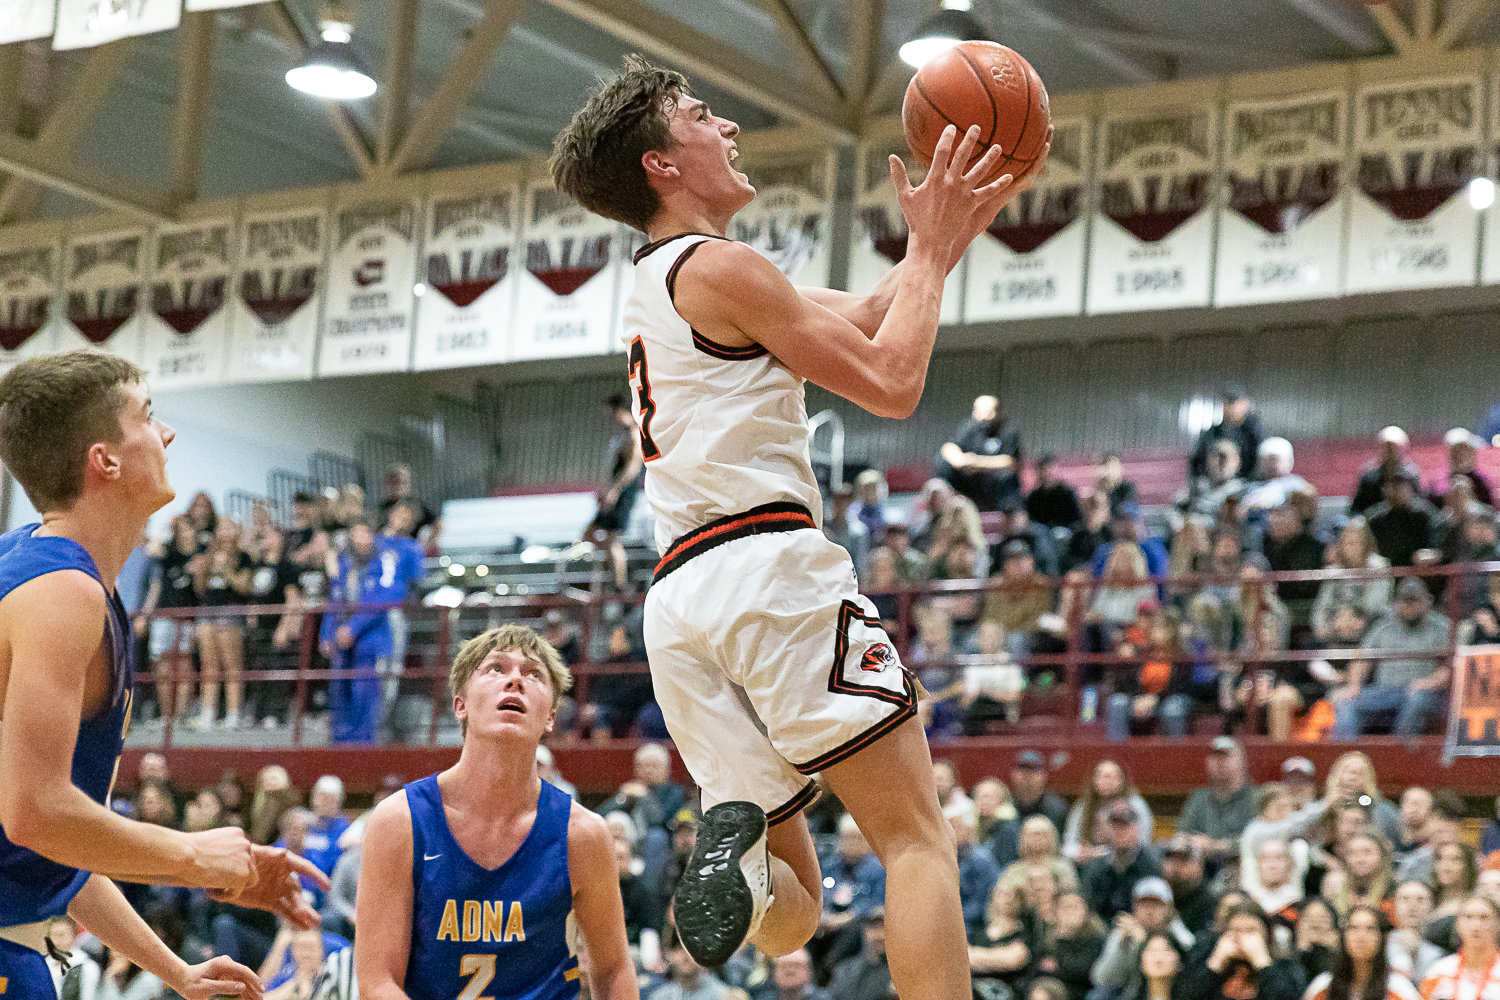 Napavine guard James Grose rises for a layup after some contact against Adna in the 2B District 4 quarterfinals at W.F. West Feb. 8.